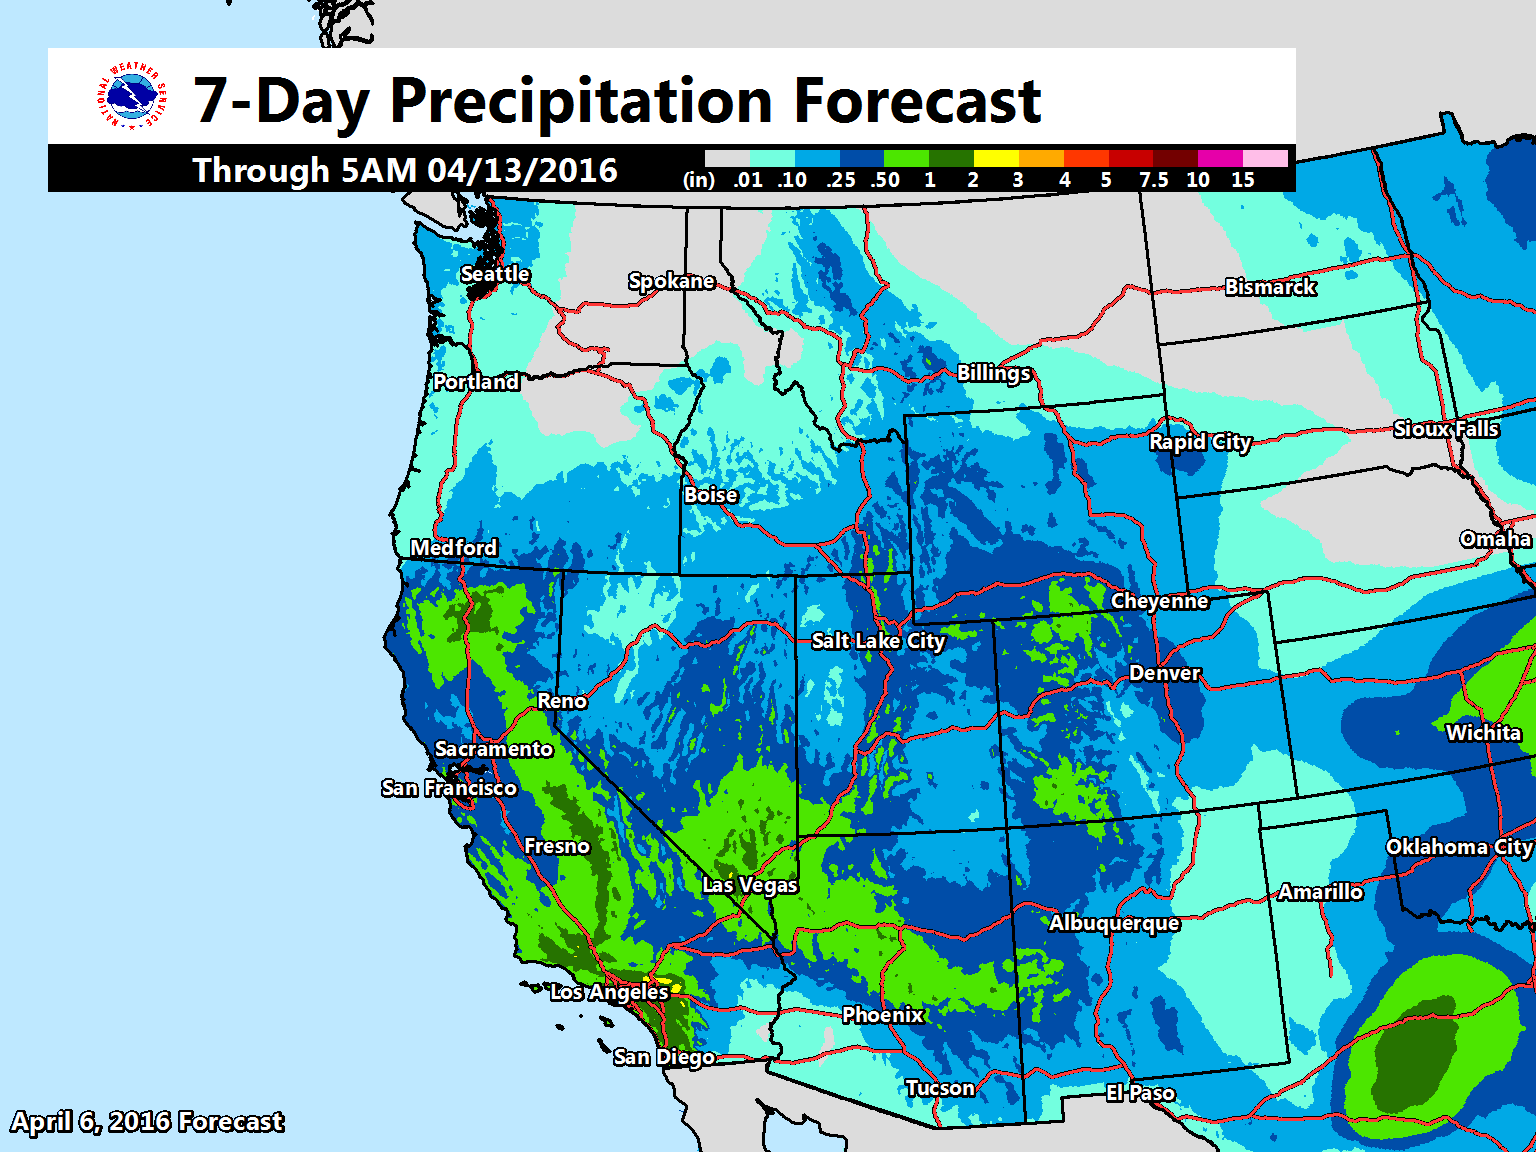 "Precipitation is on the way over the next week, especially over the southern half of the western U.S.!" - NOAA, today